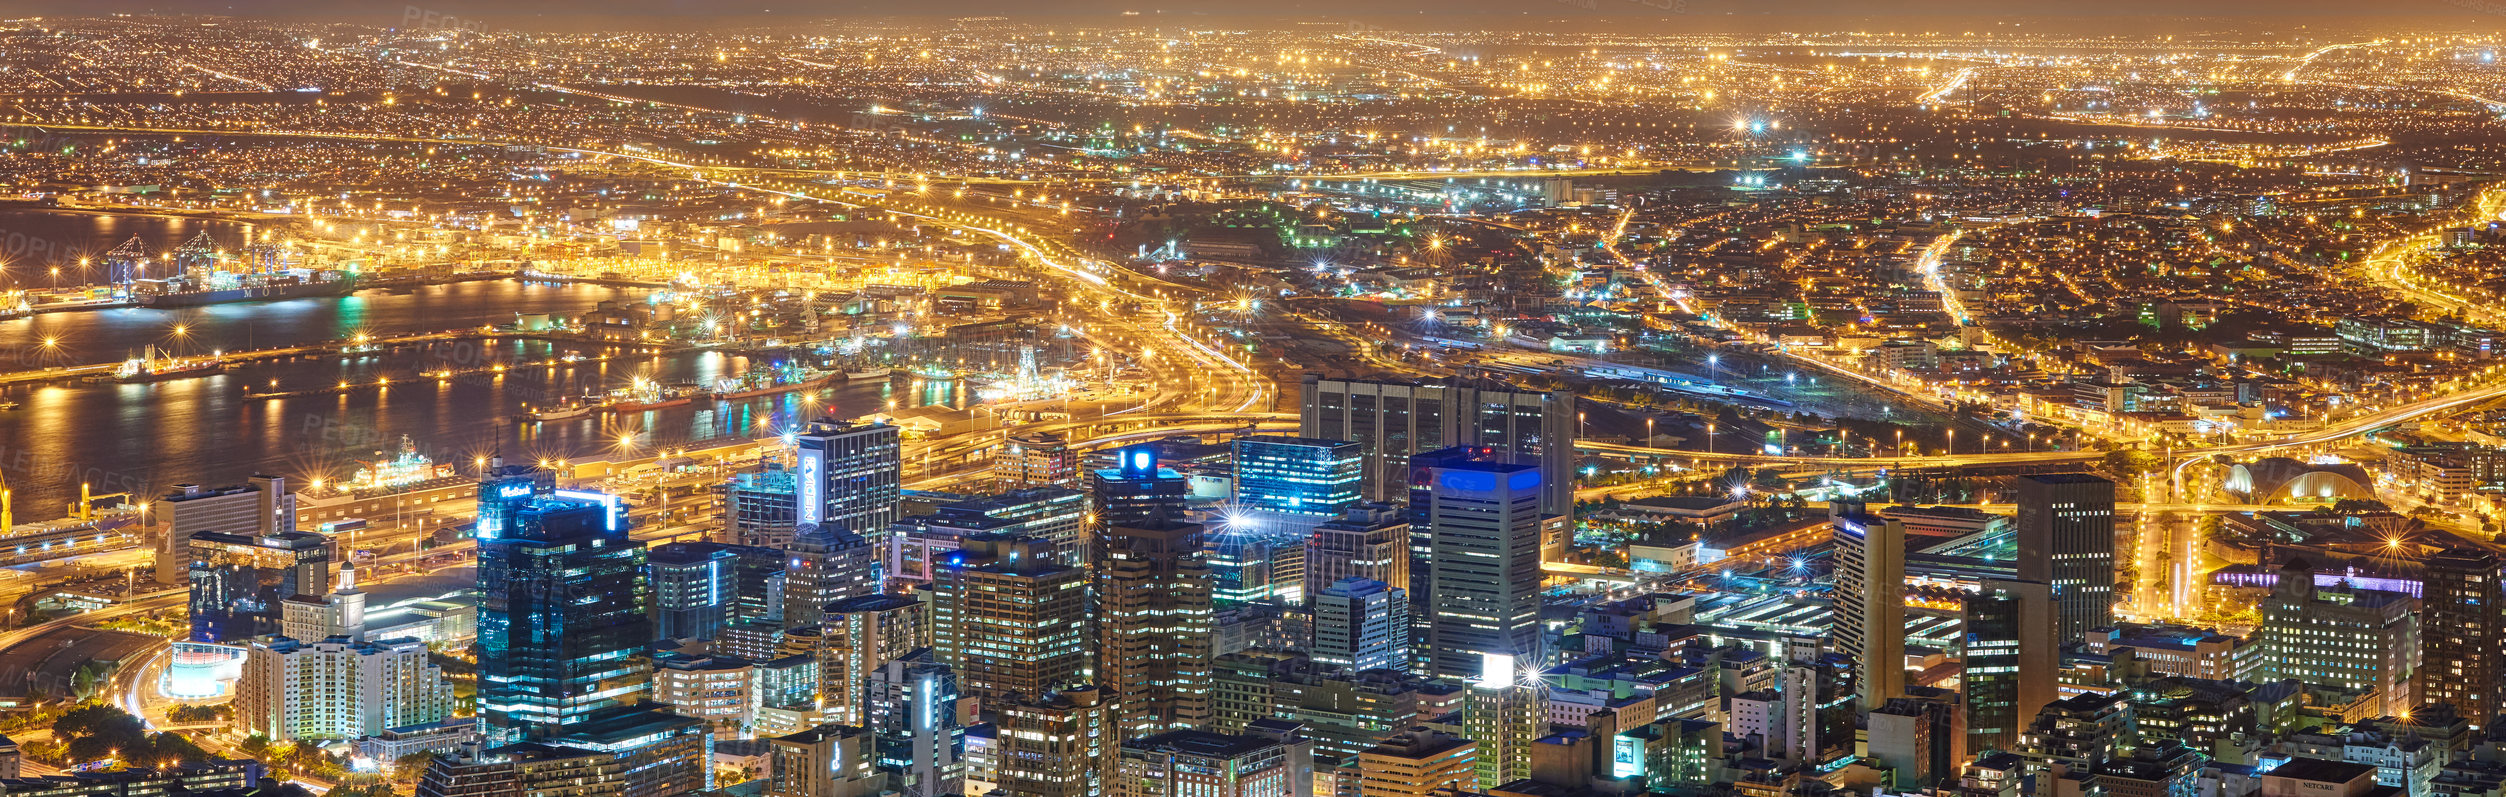 Buy stock photo Panorama night landscape of Cape Town city in South Africa. Electricity powered urban CBD, traffic, surrounding suburbs or neighbourhoods. Scenic view of lit town and travel and tourism destination